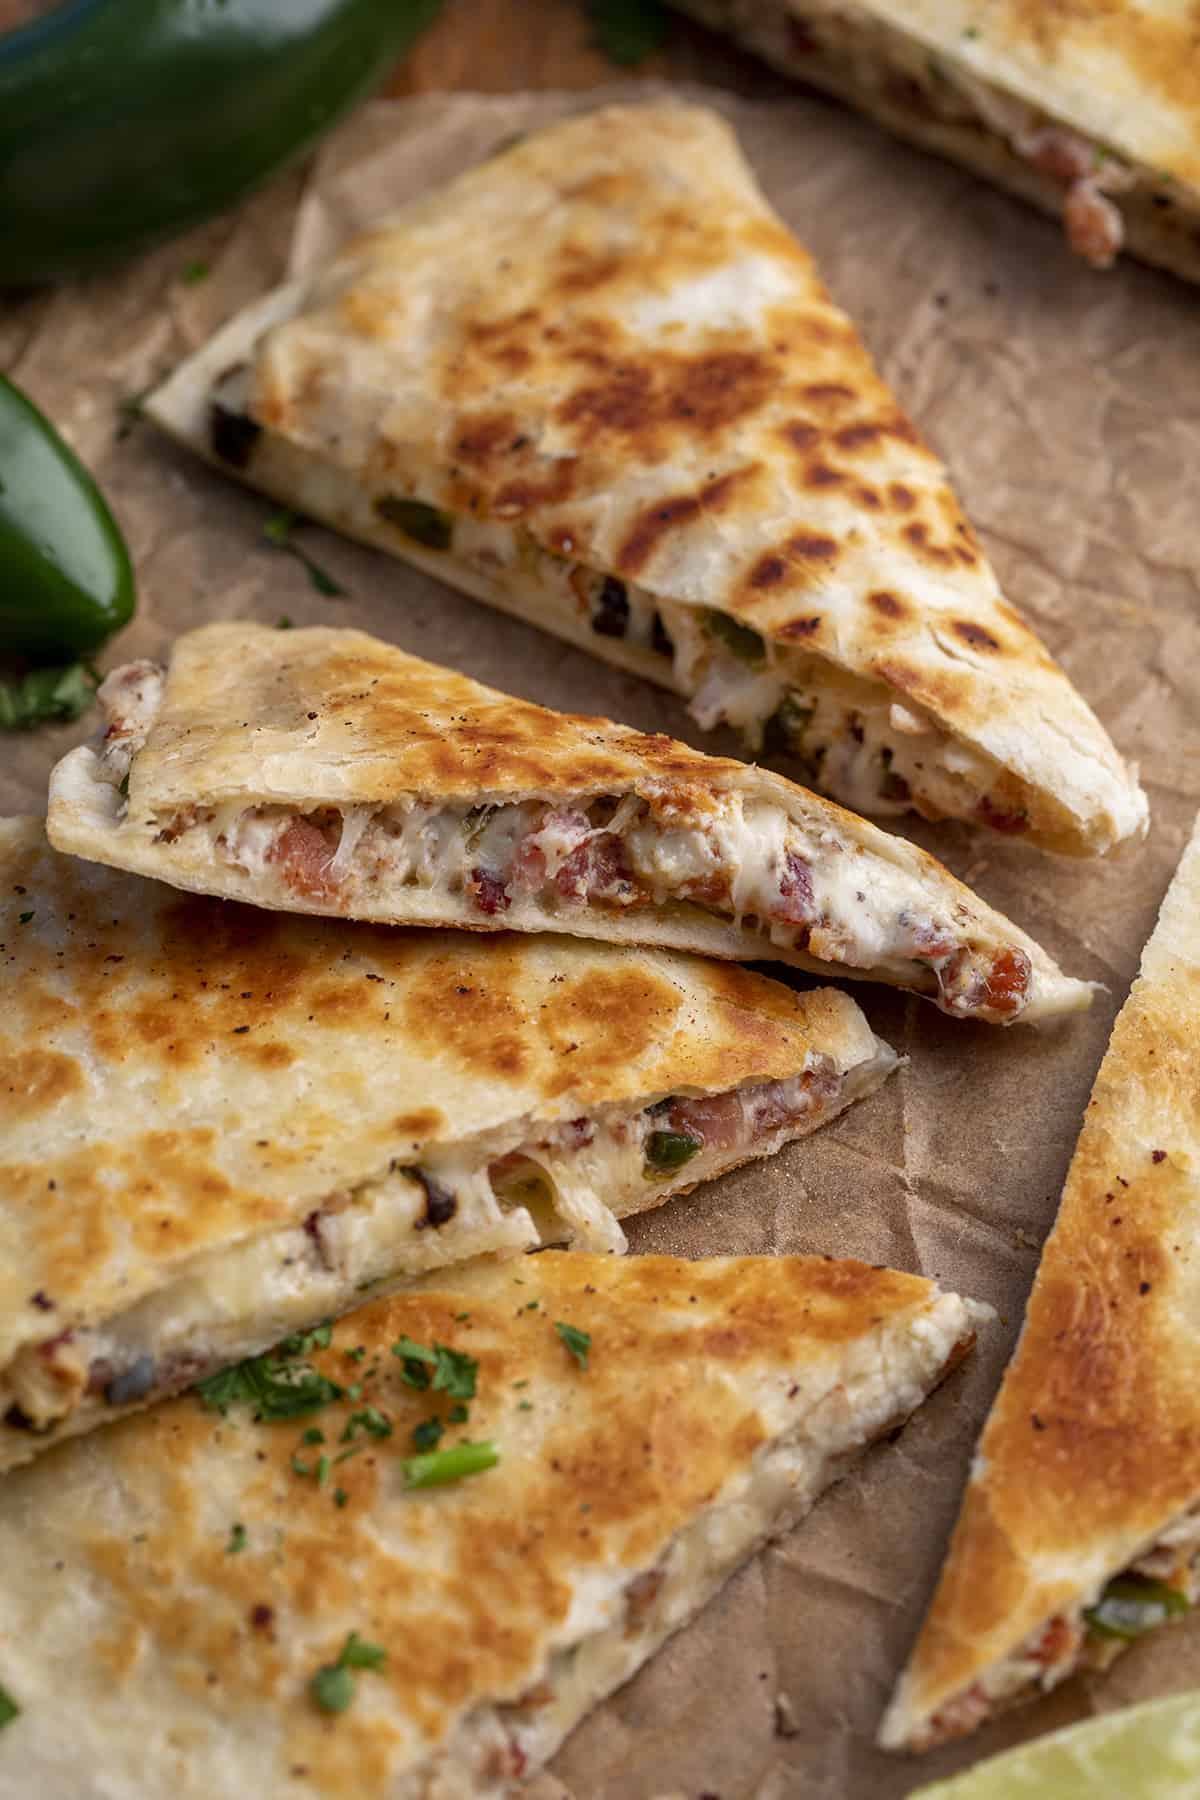 Jalapeno Popper Quesadillas Cut Up and Showing Inside